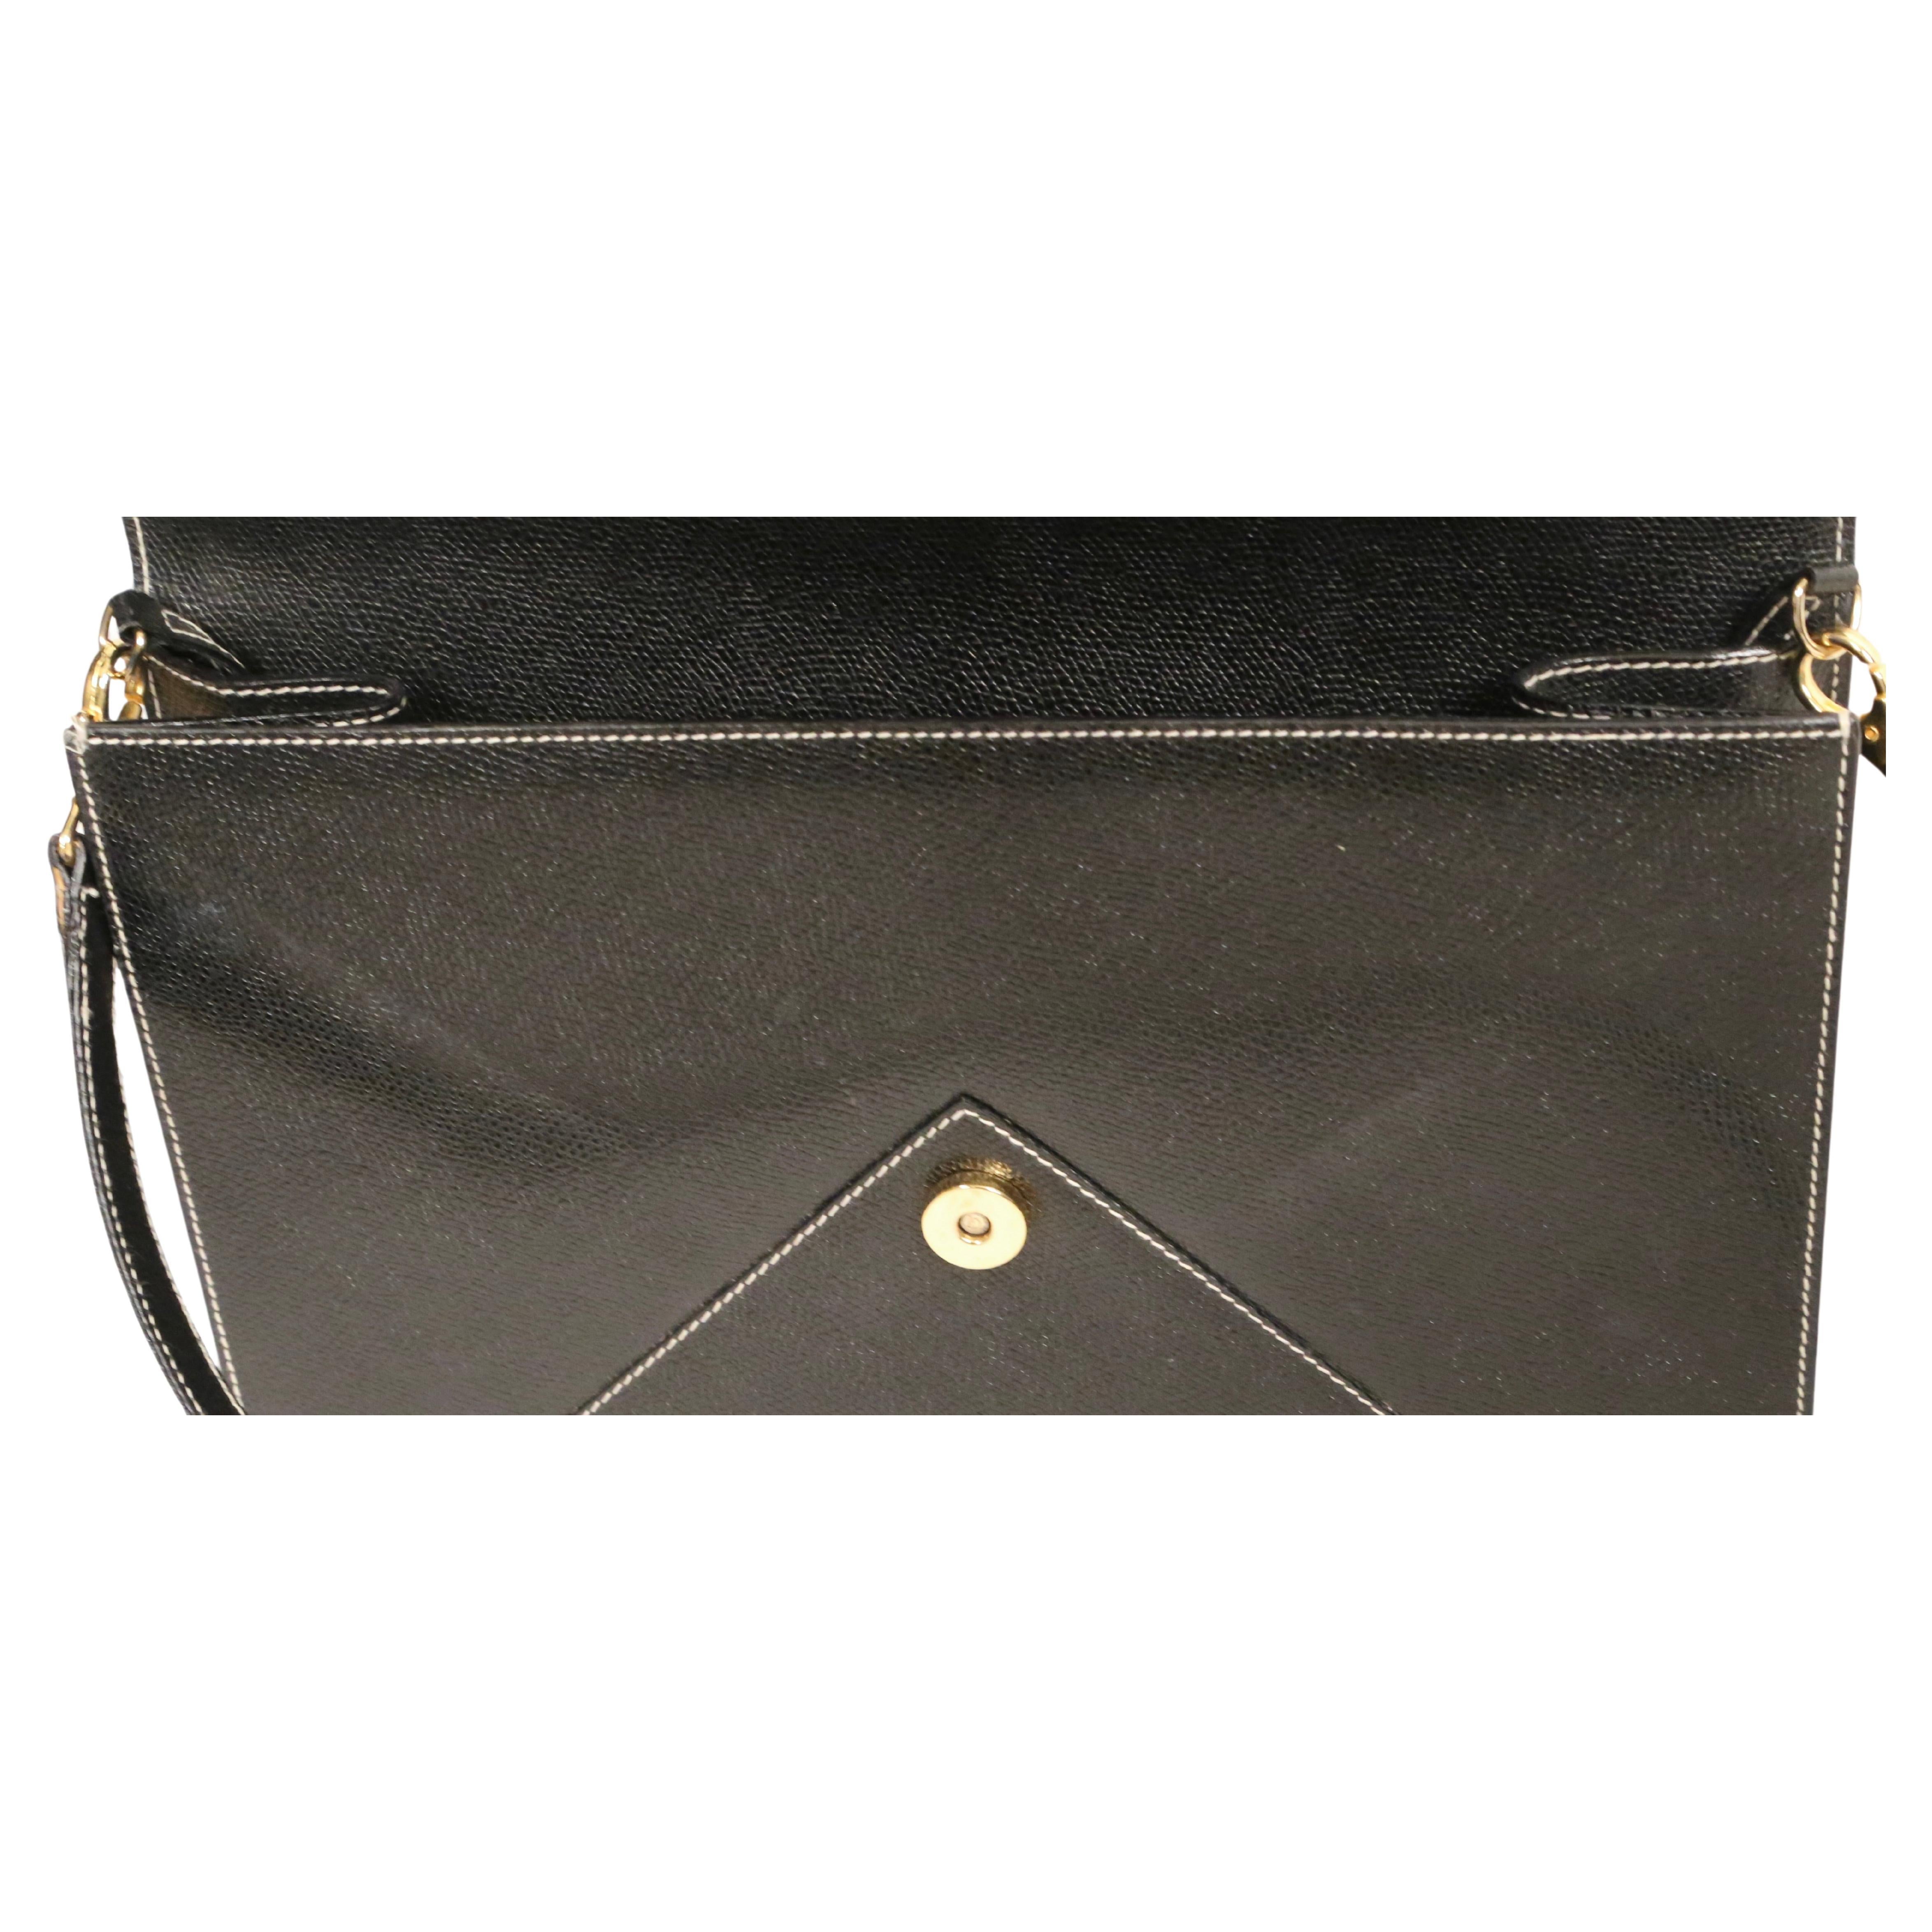  1990's VALENTINO black textured leather convertible 'envelope' clutch bag For Sale 1